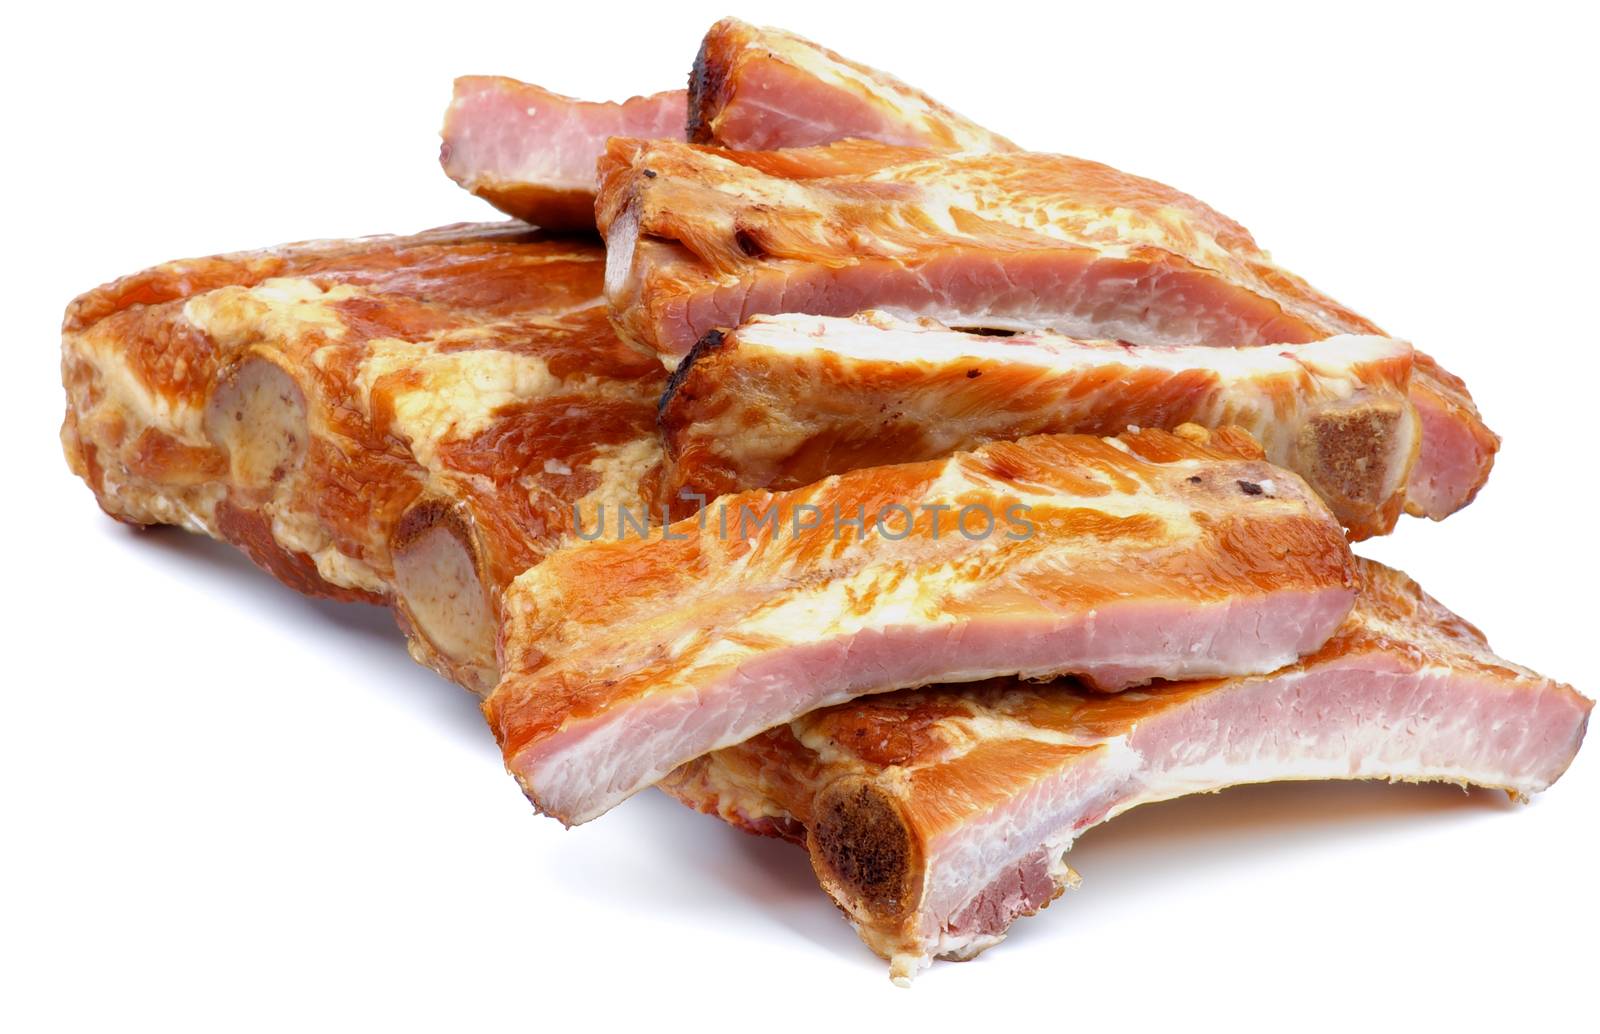 Heap of Delicious Smoked Pork Ribs Slices Isolated on White background